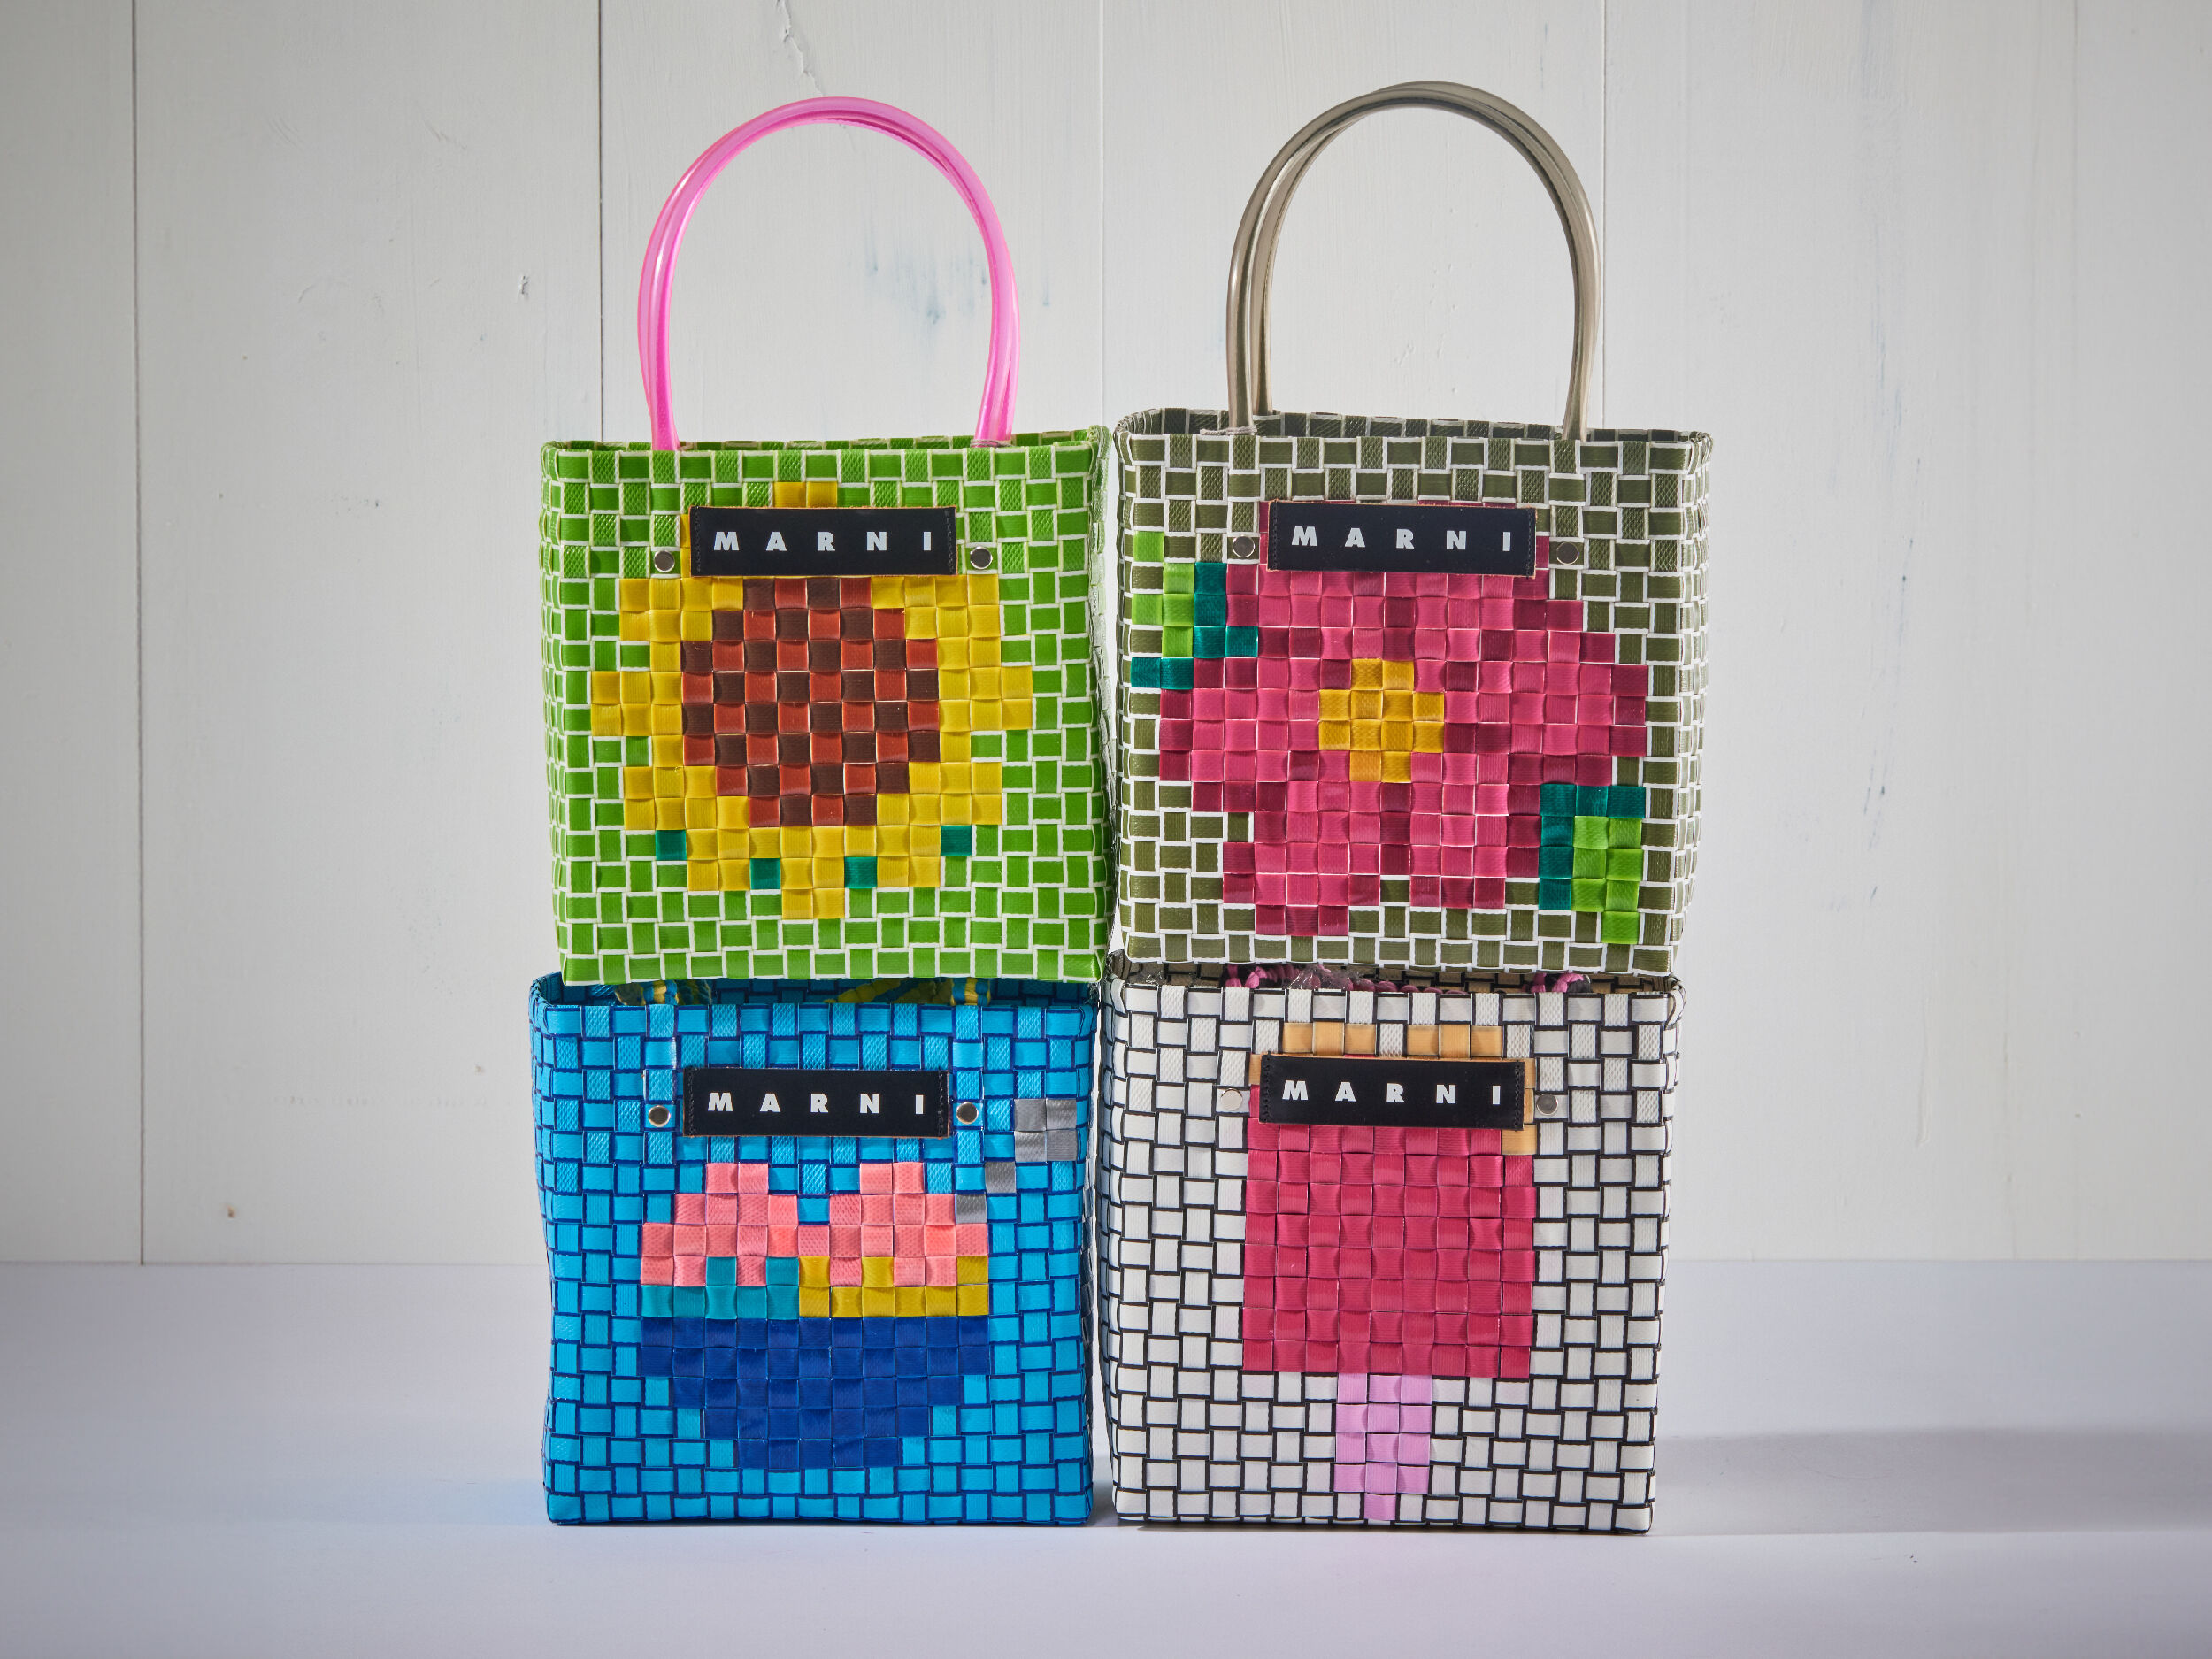 Marni Market bags, furniture and accessories | Marni official online 